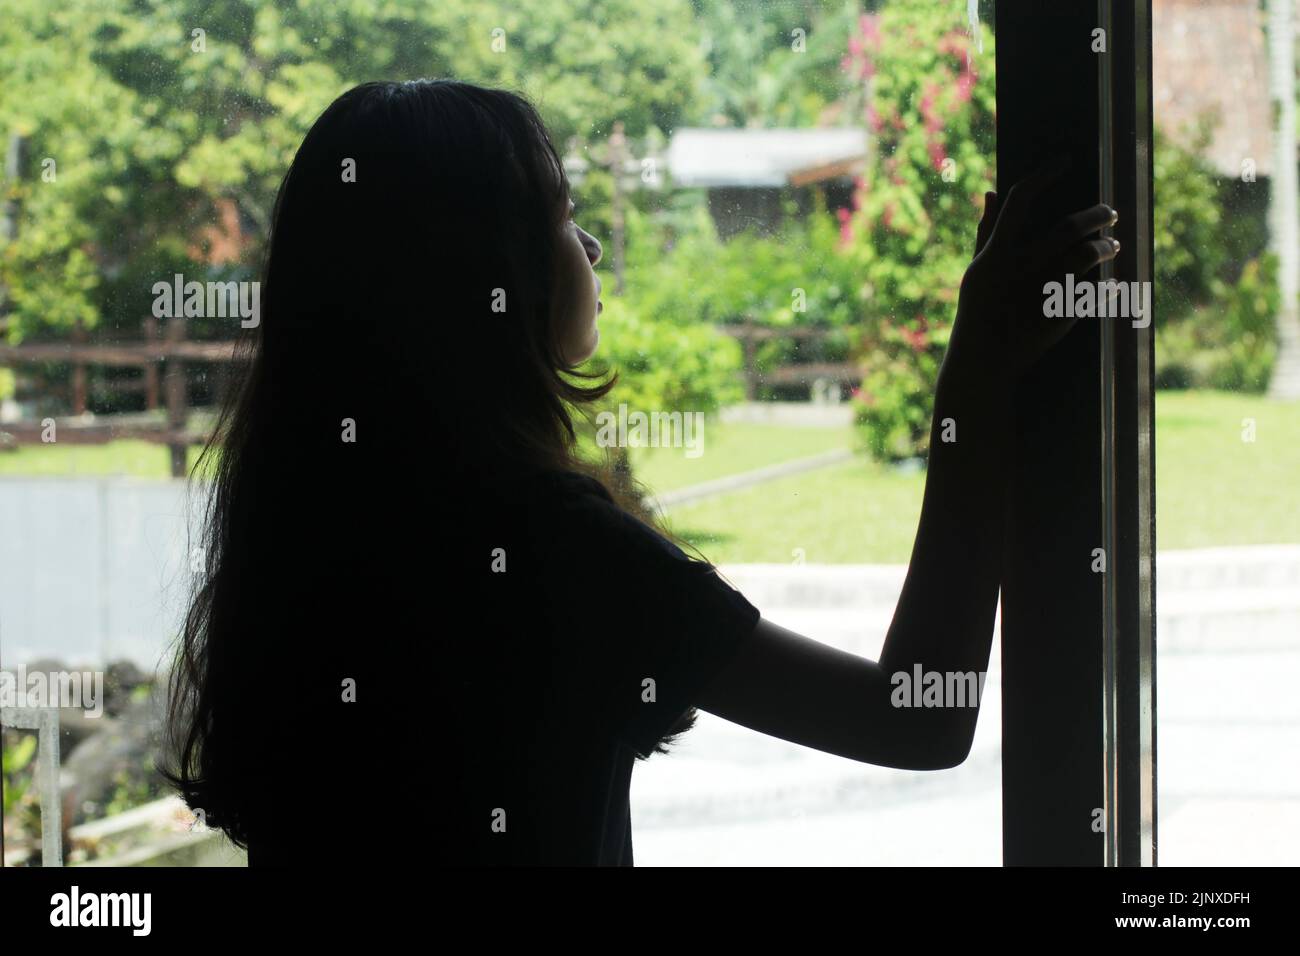 Silhouette of a girl with long hair, standing alone from behind, looking at the window day-dreaming thinking about life, deep in thought. Stock Photo